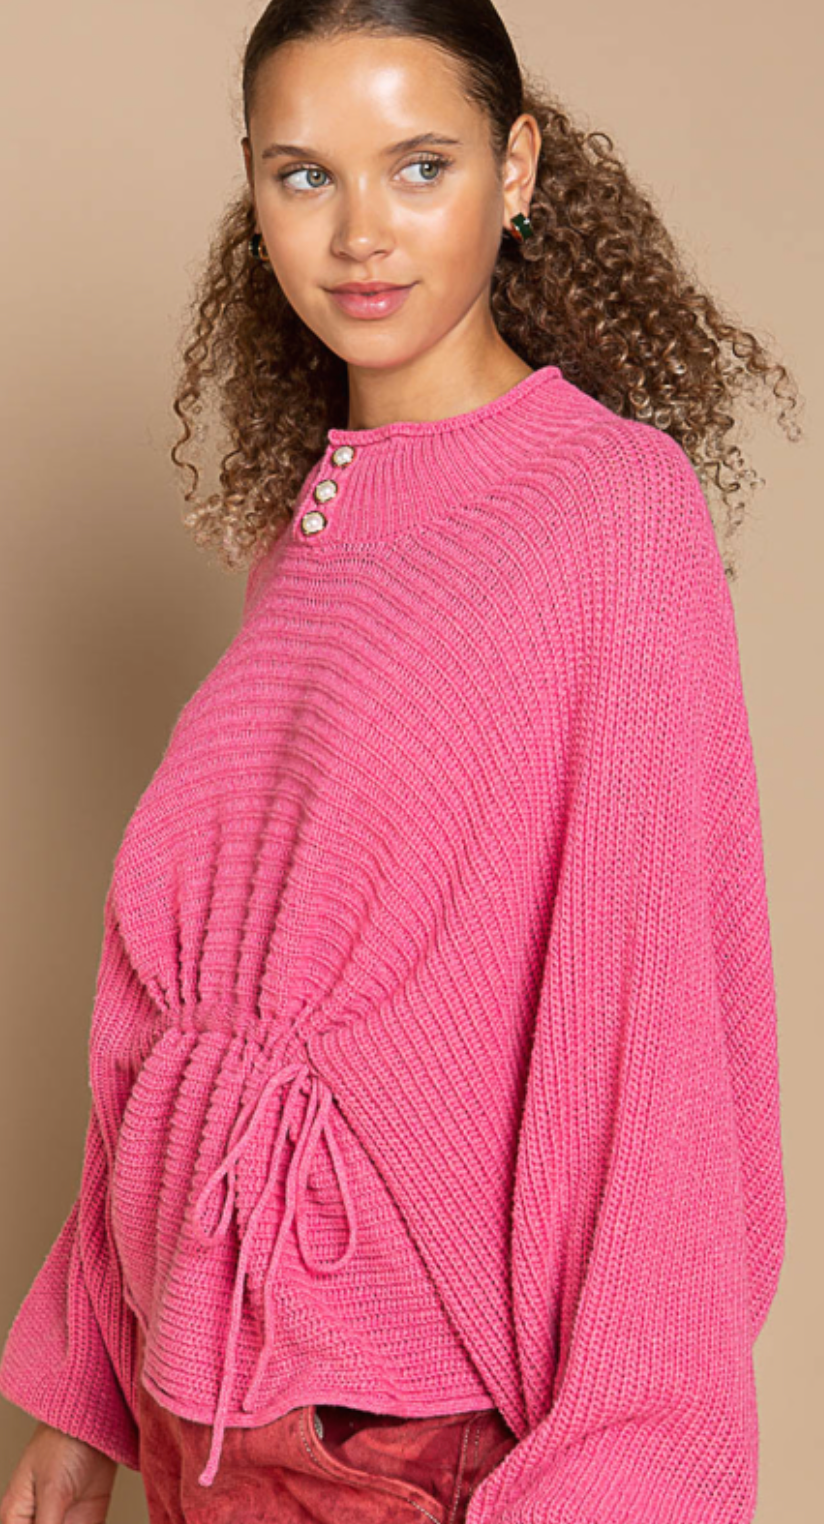 Polly Pearl Sweater